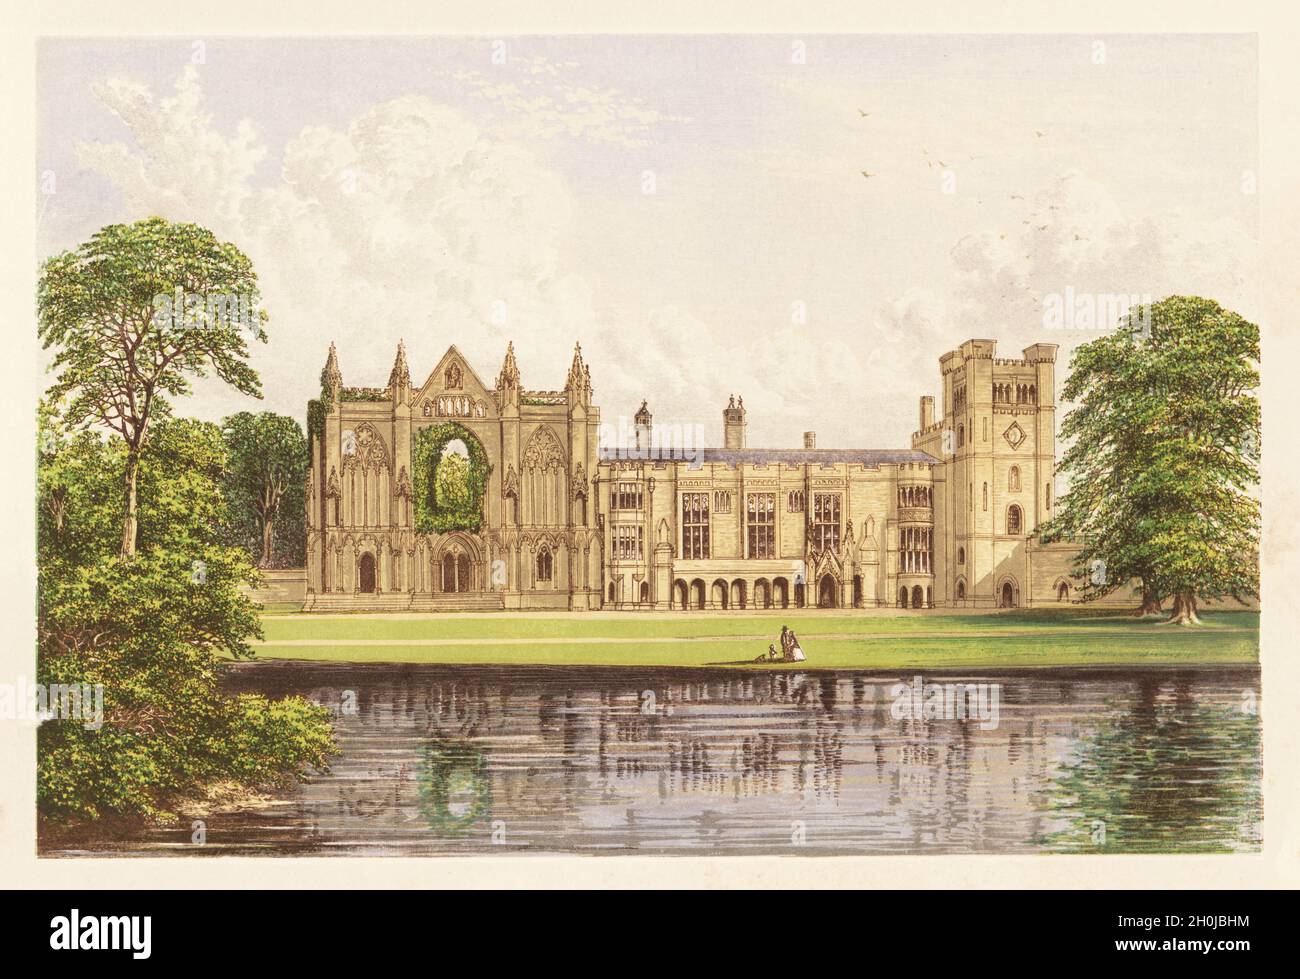 Newstead Abbey, Nottinghamshire, England. Medieval Augustinian priory granted to Sir John Byron by King Henry VIII at the Dissolution of the Monasteries. Formerly the home of poet George Gordon Byron, 6th Baron Byron. Bought in 1818 by Thomas Wildman, owner of 241 enslaved persons in Jamaica. Colour woodblock by Benjamin Fawcett in the Baxter process of an illustration by Alexander Francis Lydon from Reverend Francis Orpen Morris’s Picturesque Views of the Seats of Noblemen and Gentlemen of Great Britain and Ireland, William Mackenzie, London, 1880. Stock Photo